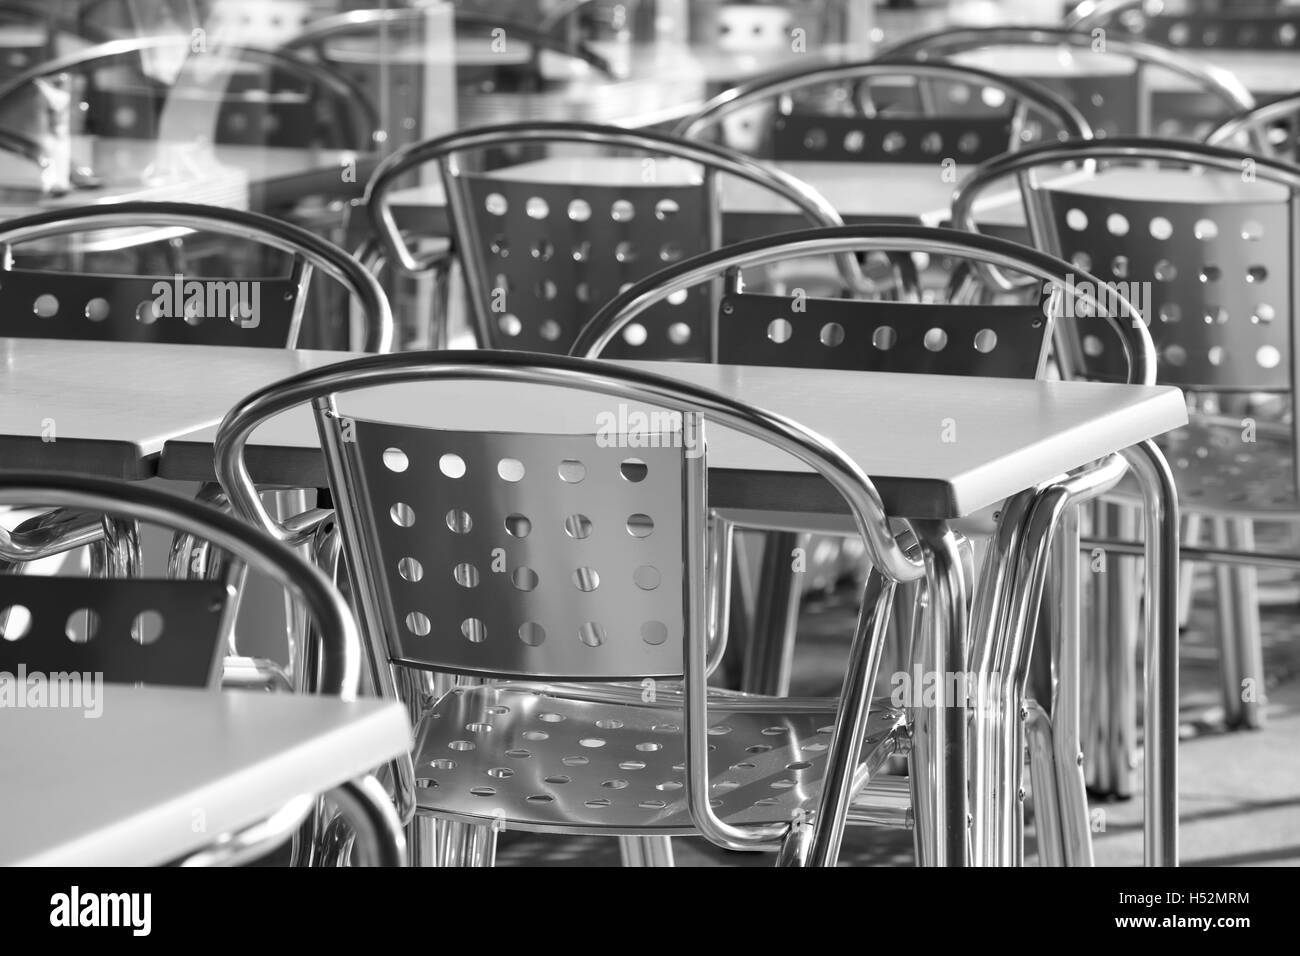 Restaurant metallic chairs group outdoors in black and white. Horizontal Stock Photo